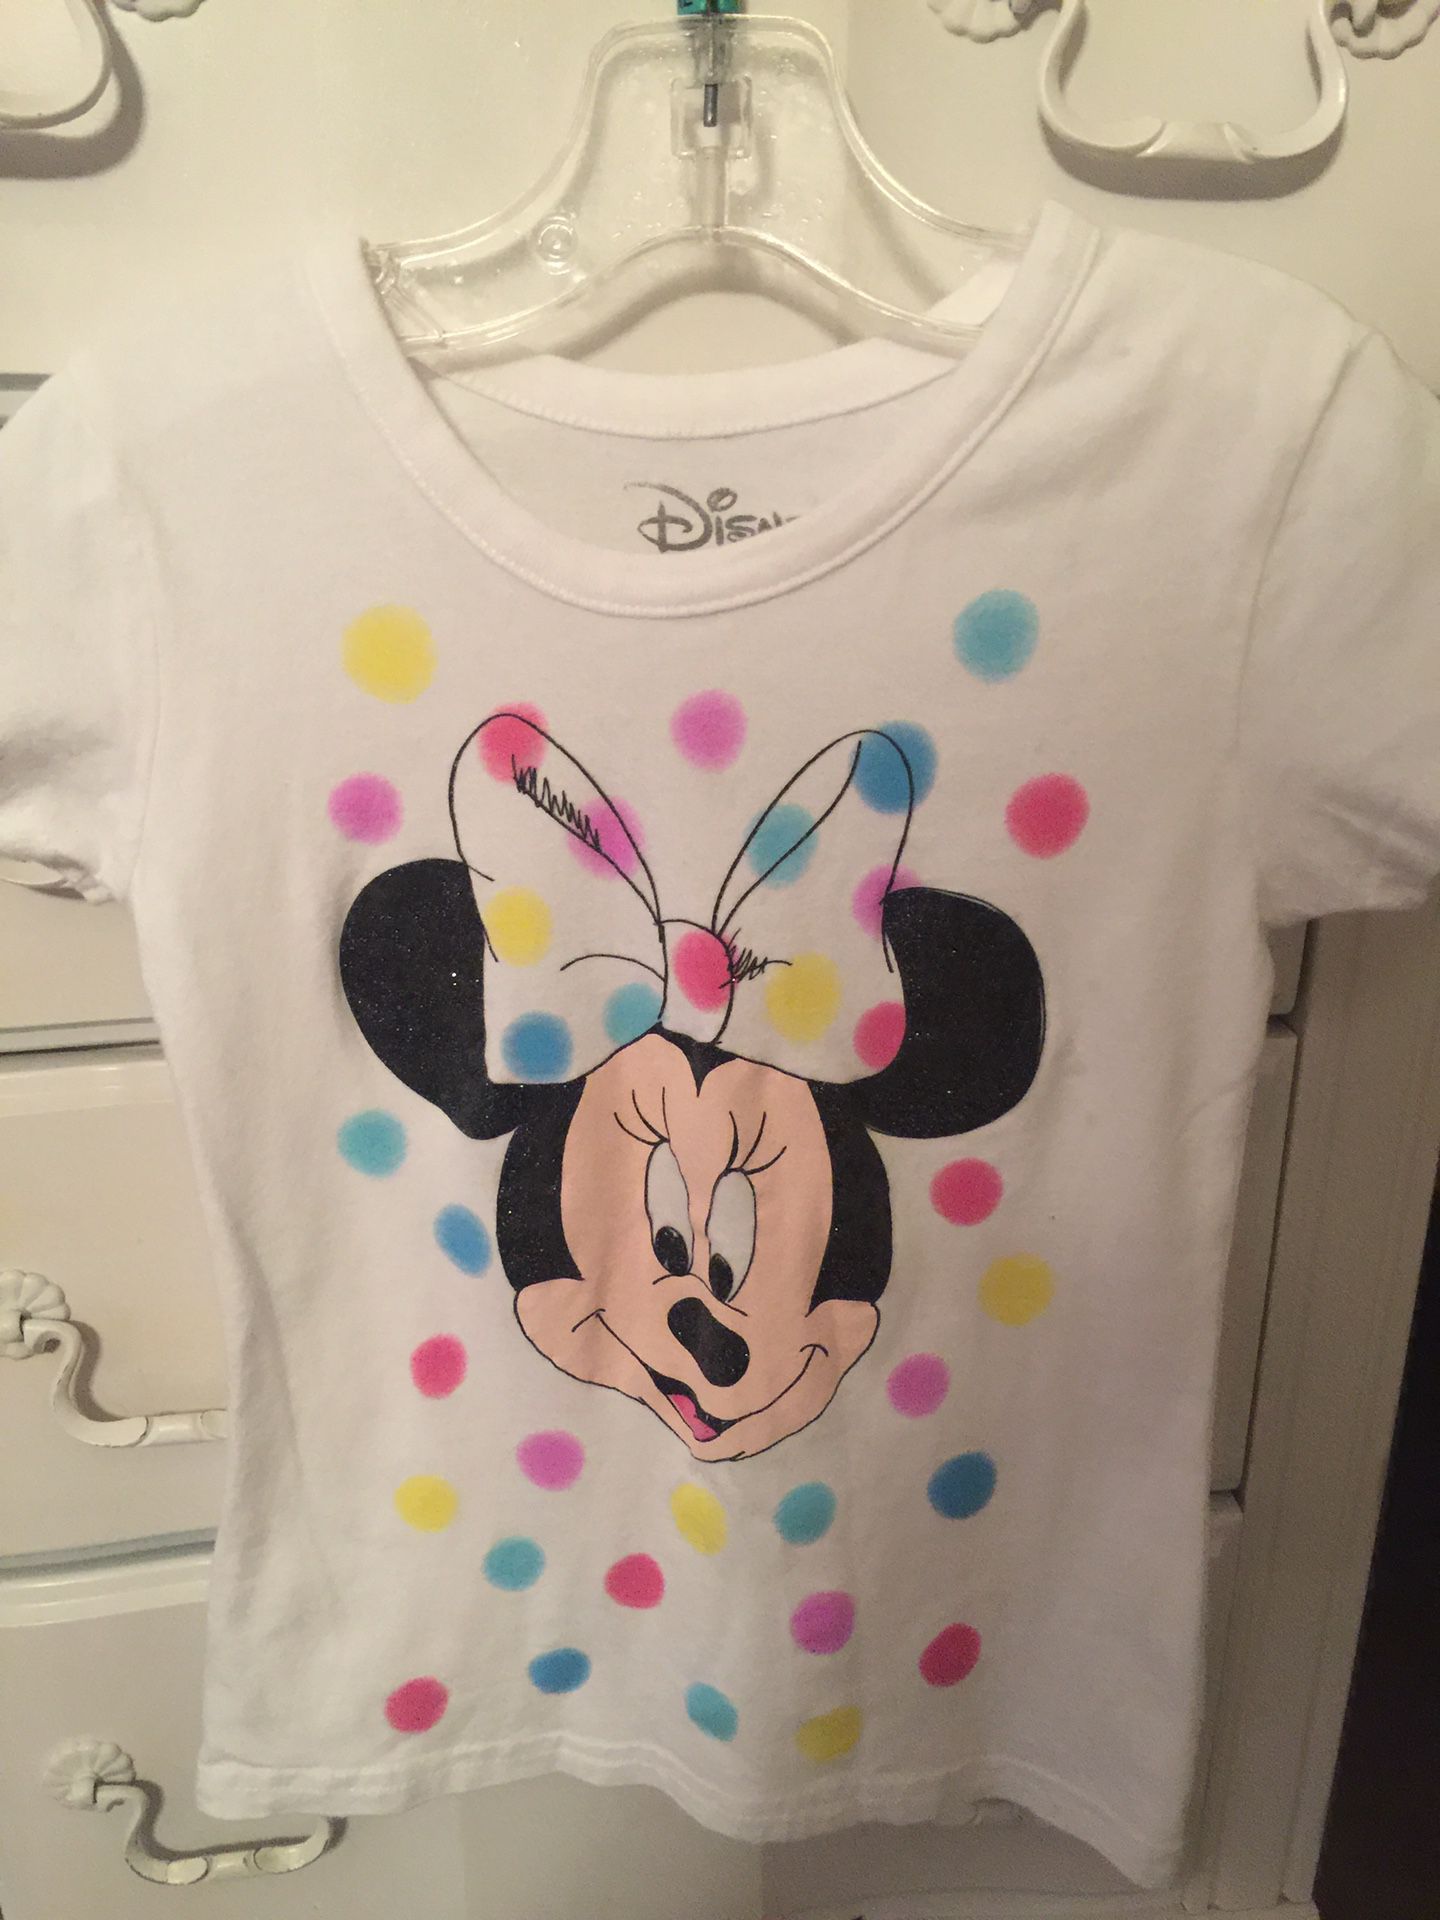 Cute Mini Mouse white cotton shirt with .Mini on front with polka dots🐝🌸 size 5 💕🌸clean nice I ship check my 🌻🌺other kids clothes